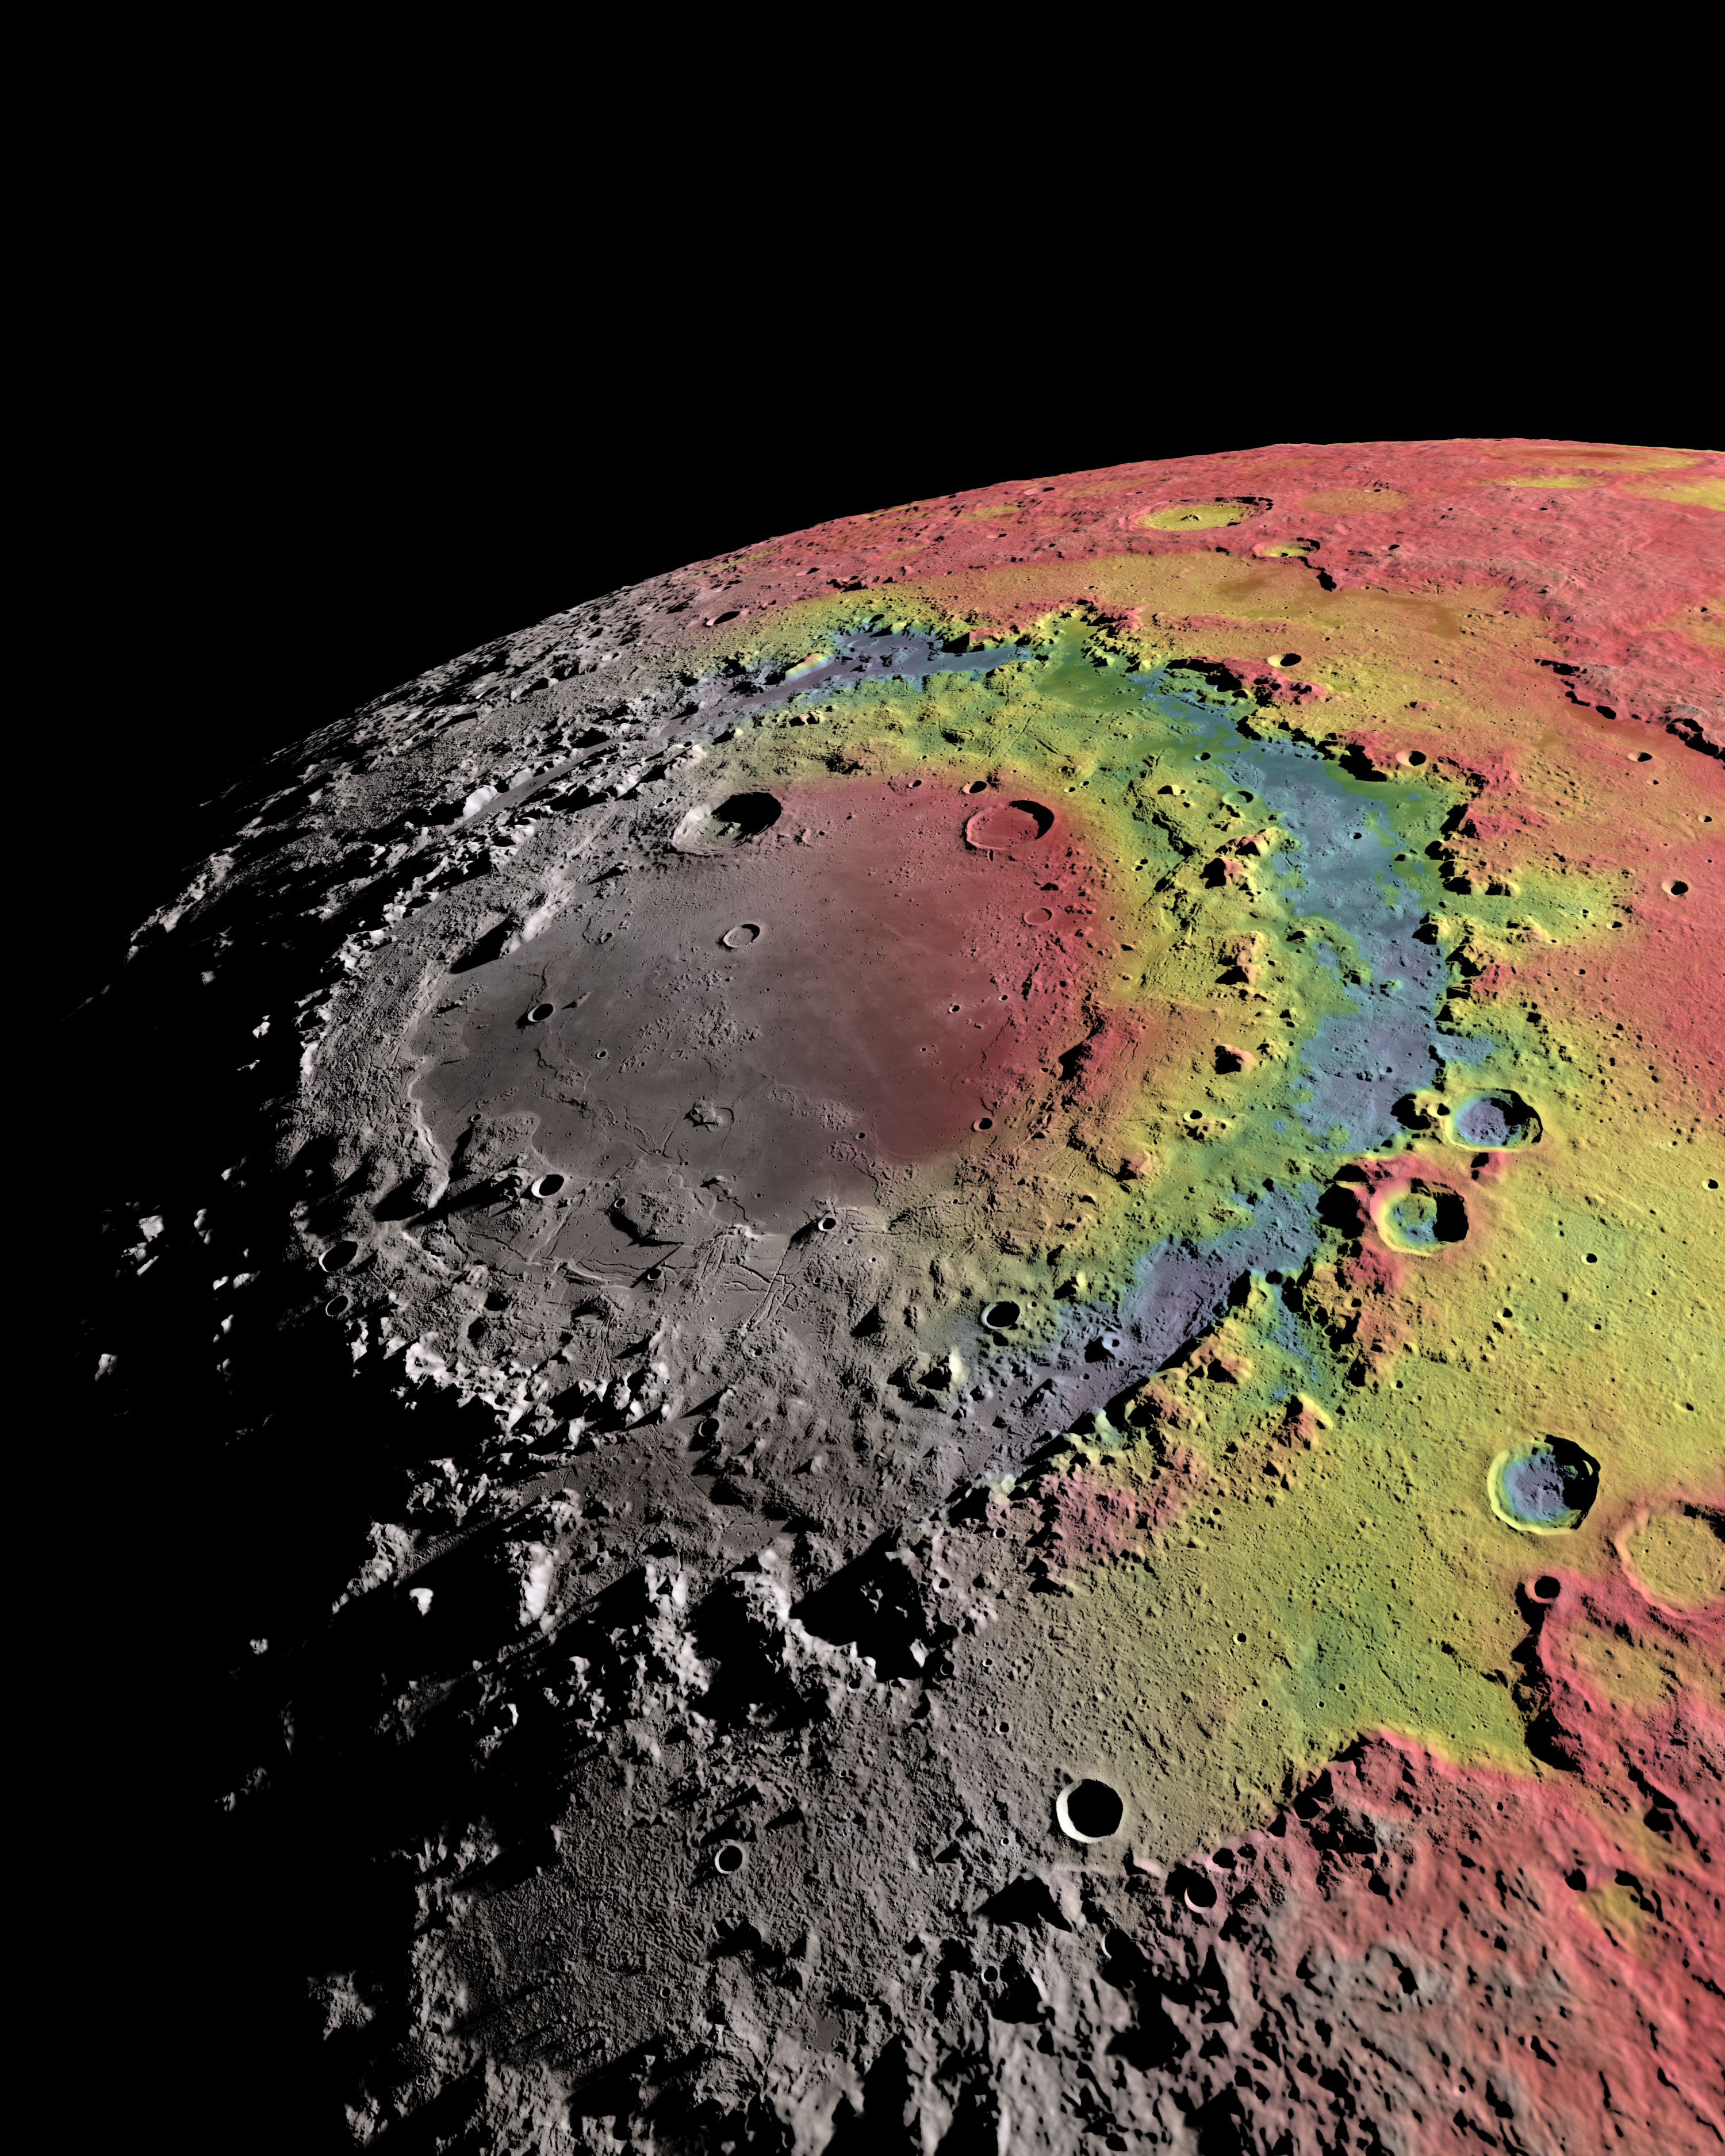 A photo of the Moon's Orientale impact basin. It is colored in to show free-air gravity differentiations. There are yellow areas (average gravity), green and blue areas (below average) and red areas (above average).